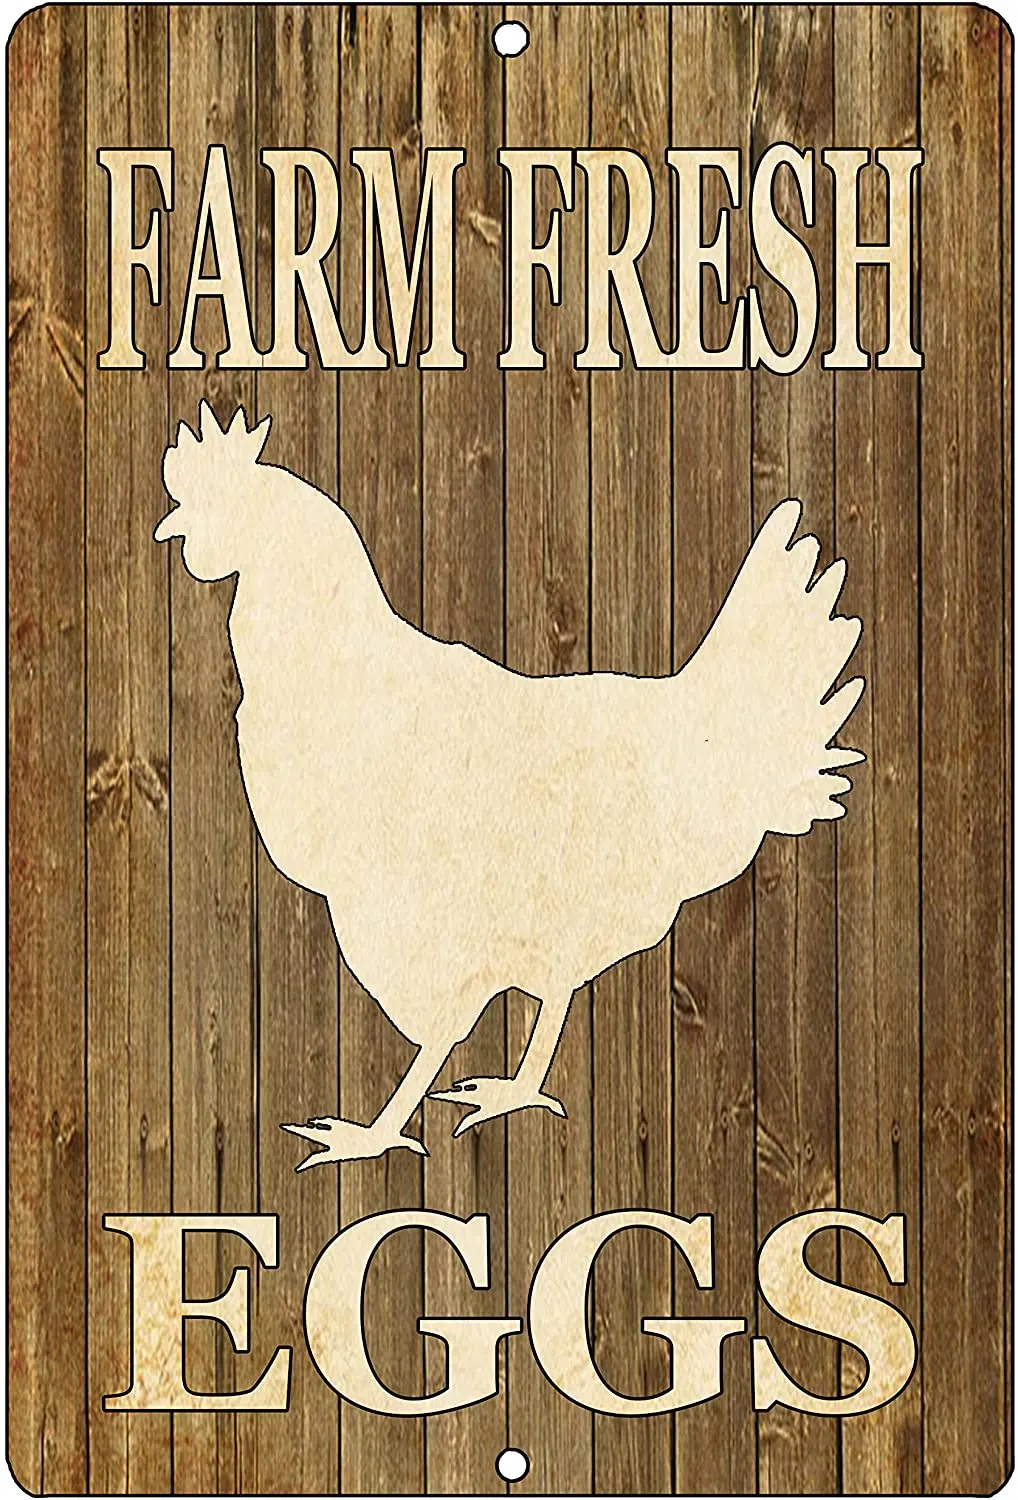 

Chicken Farm Fresh Eggs Metal Tin Sign Ranch Kitchen Wall Decor Country Rustic Home Decoration Accessories Modern Yard Letters